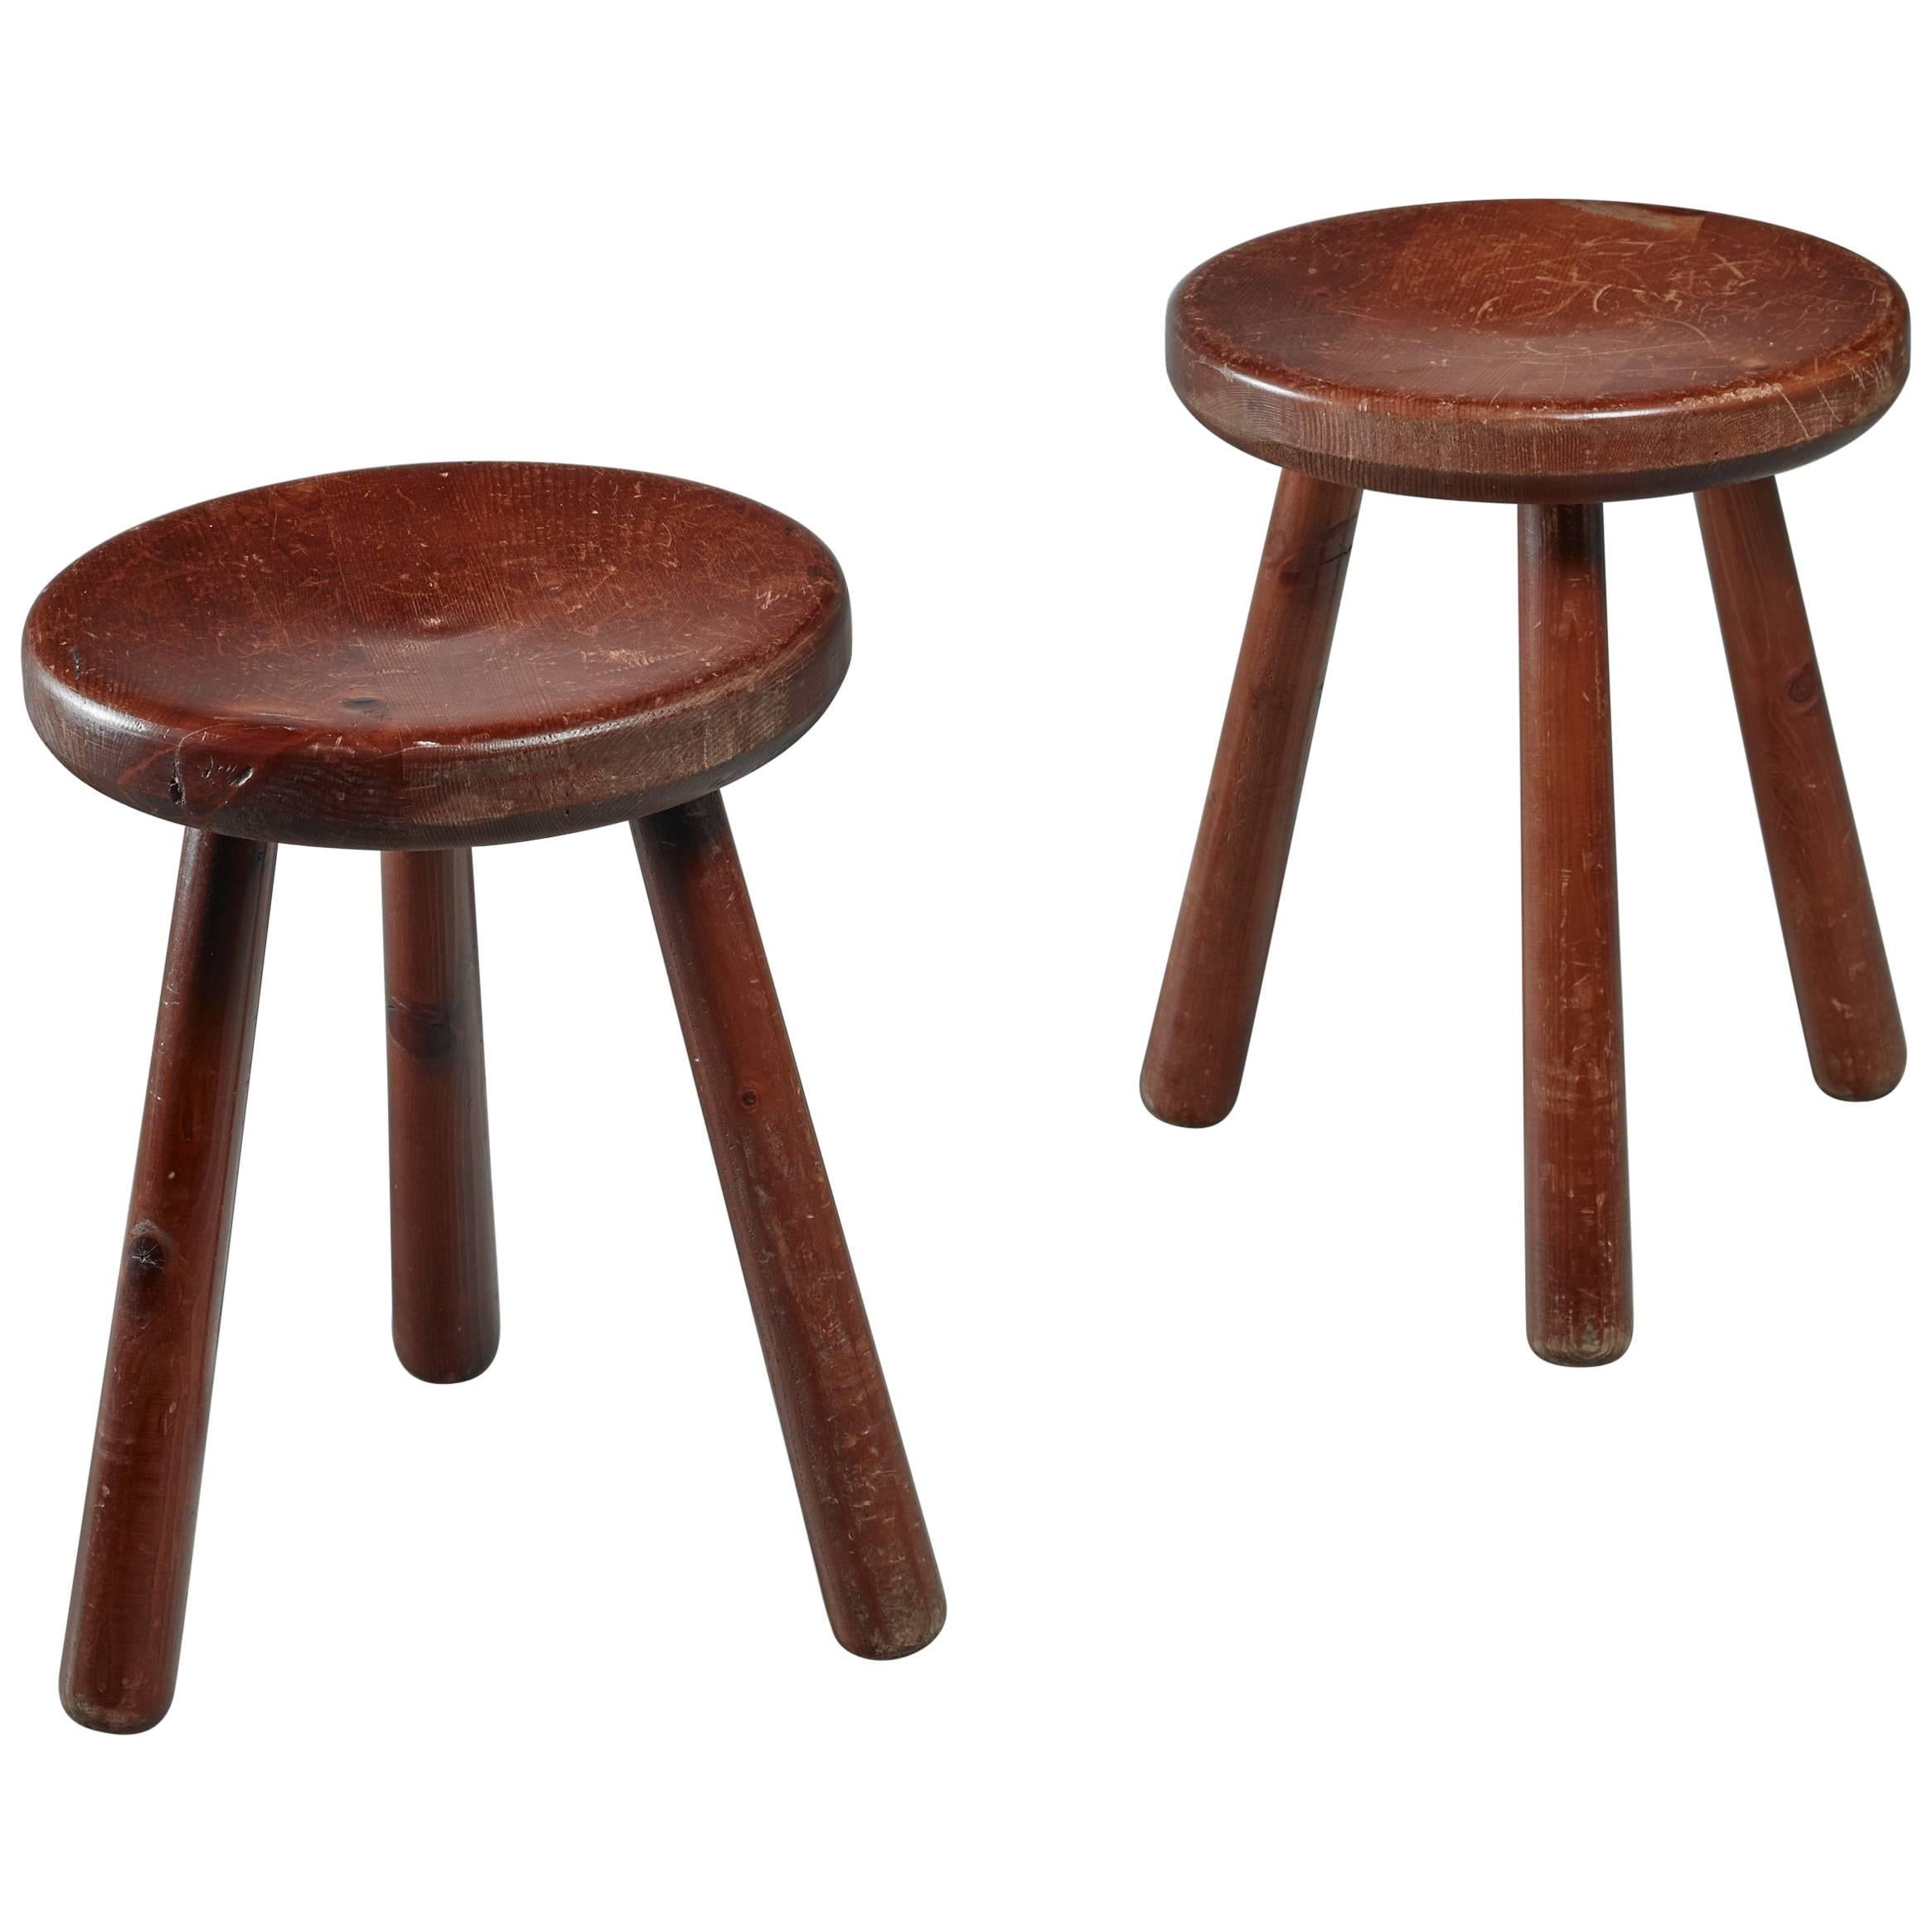 Pair of French Campagne Style Tripod Stools, 1950s For Sale